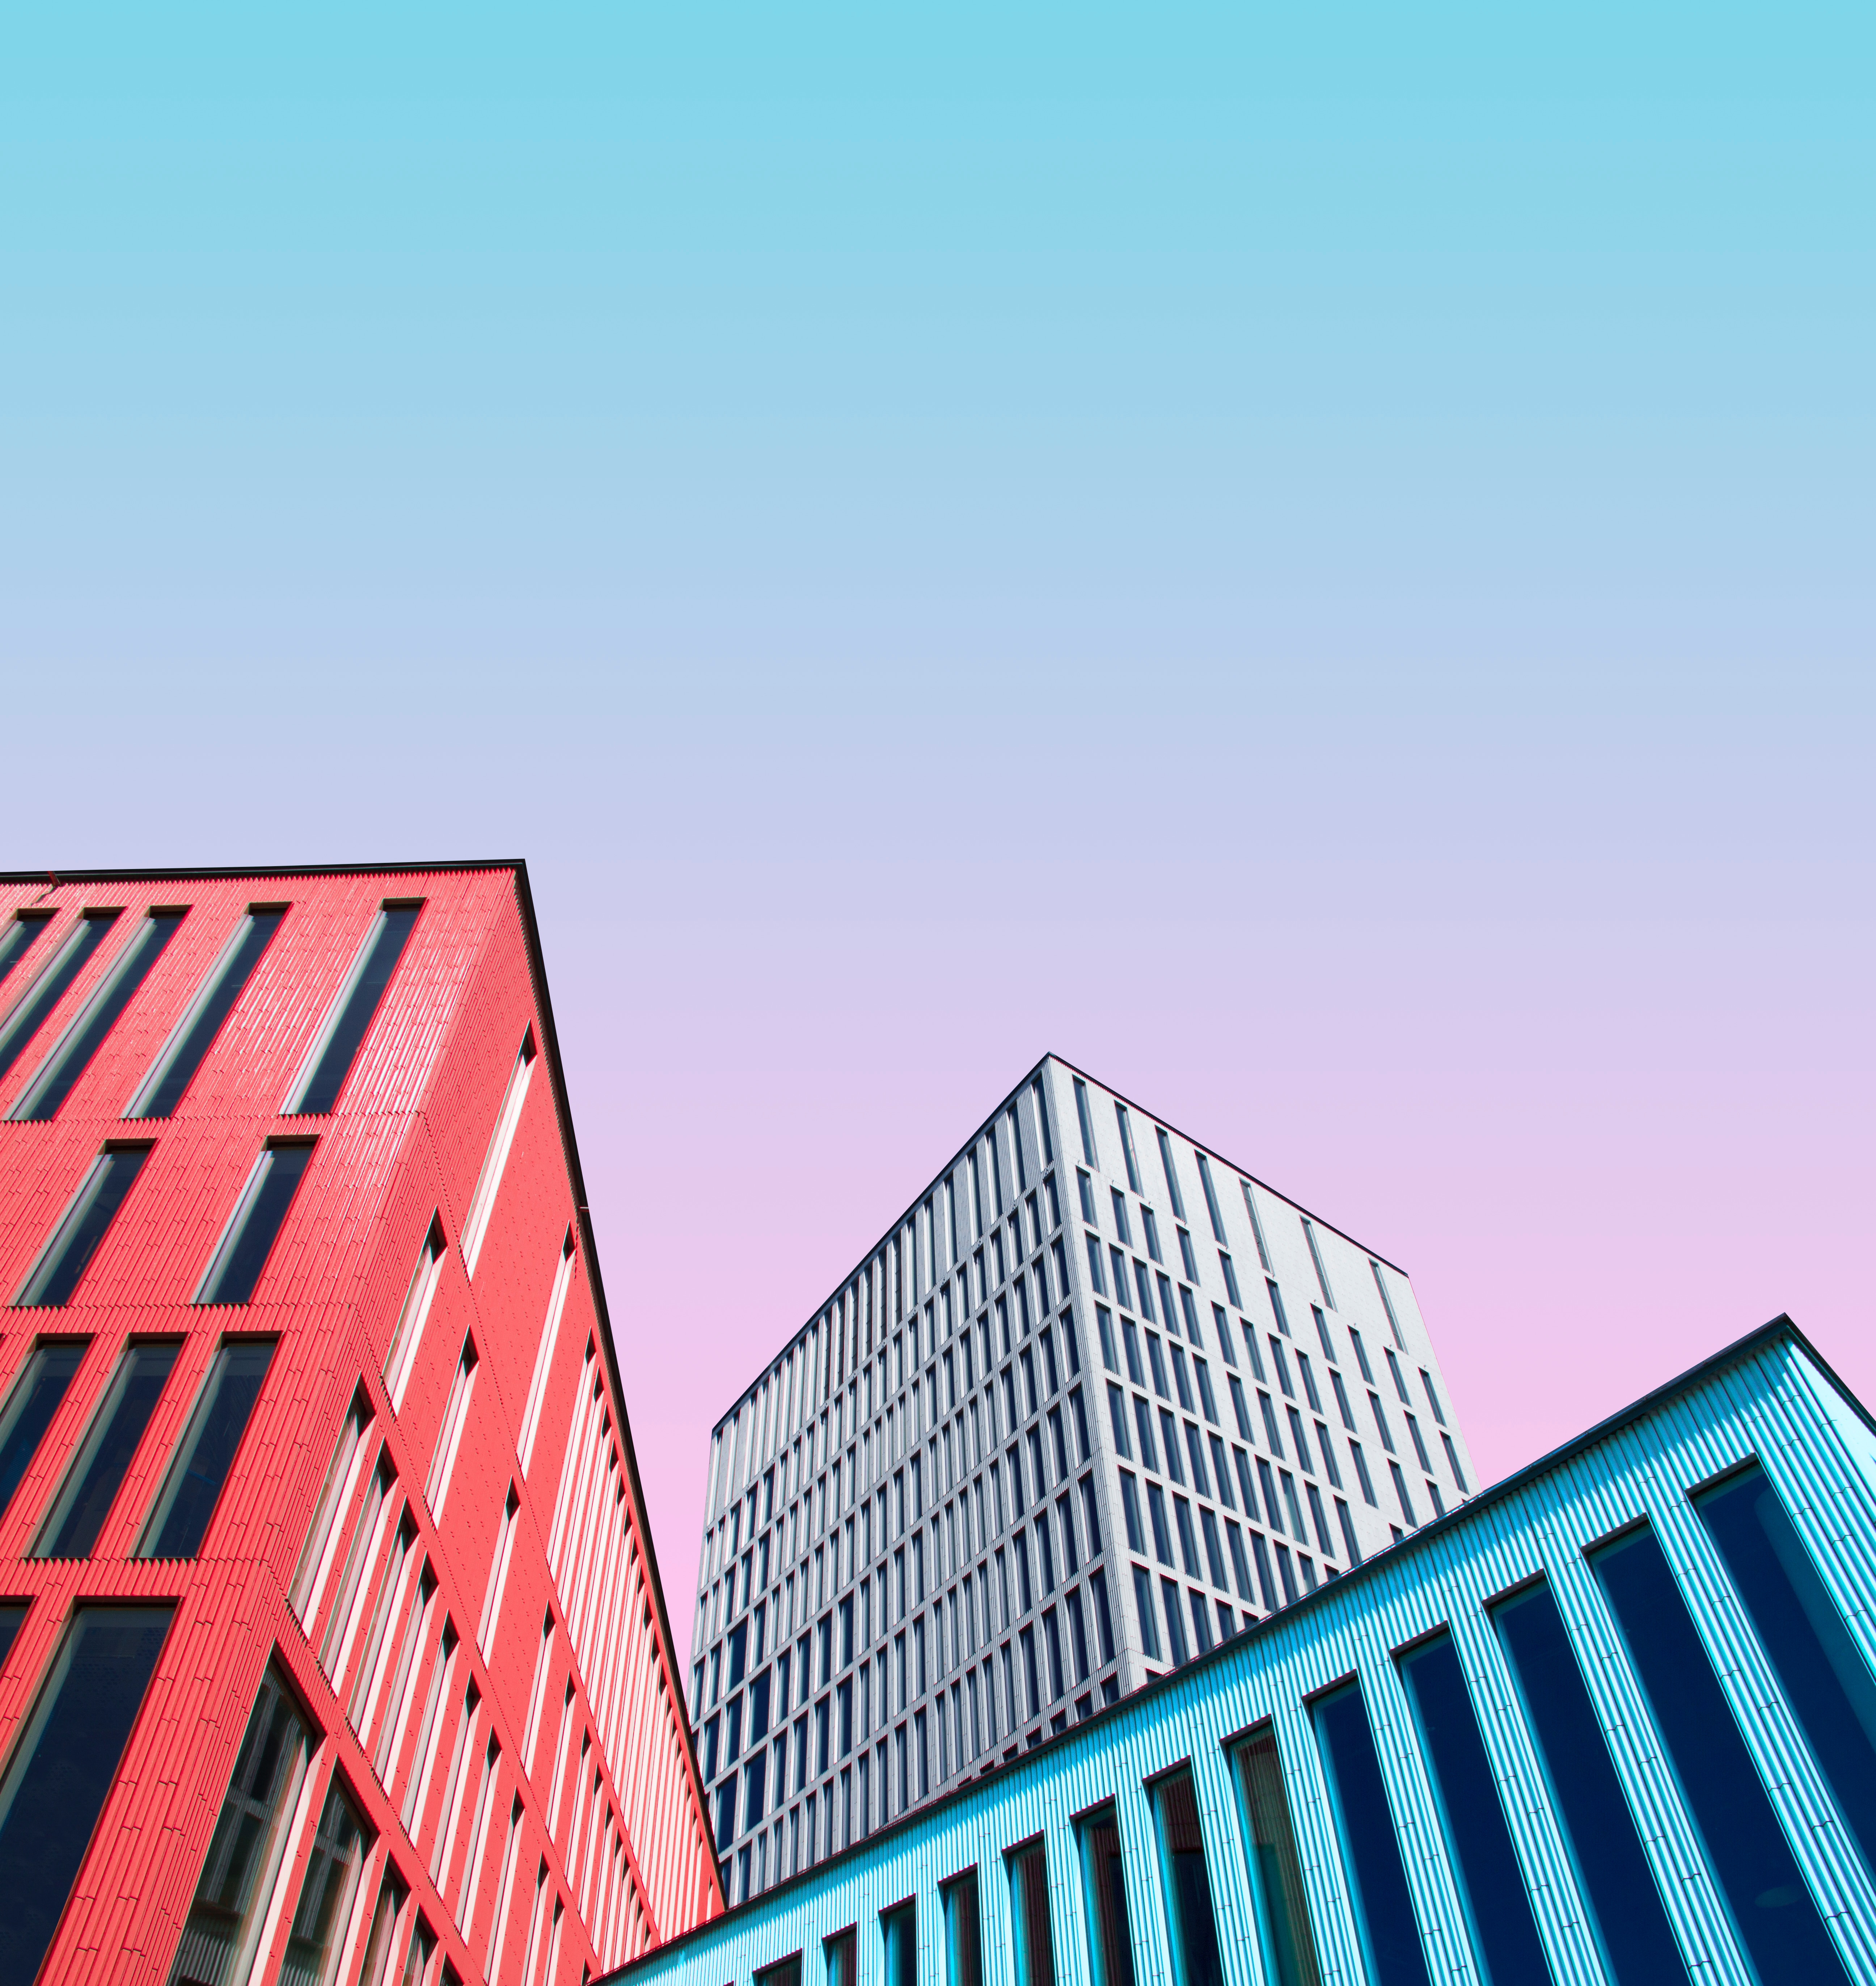 multicolored, architecture, building, motley, minimalism, symmetry wallpaper for mobile